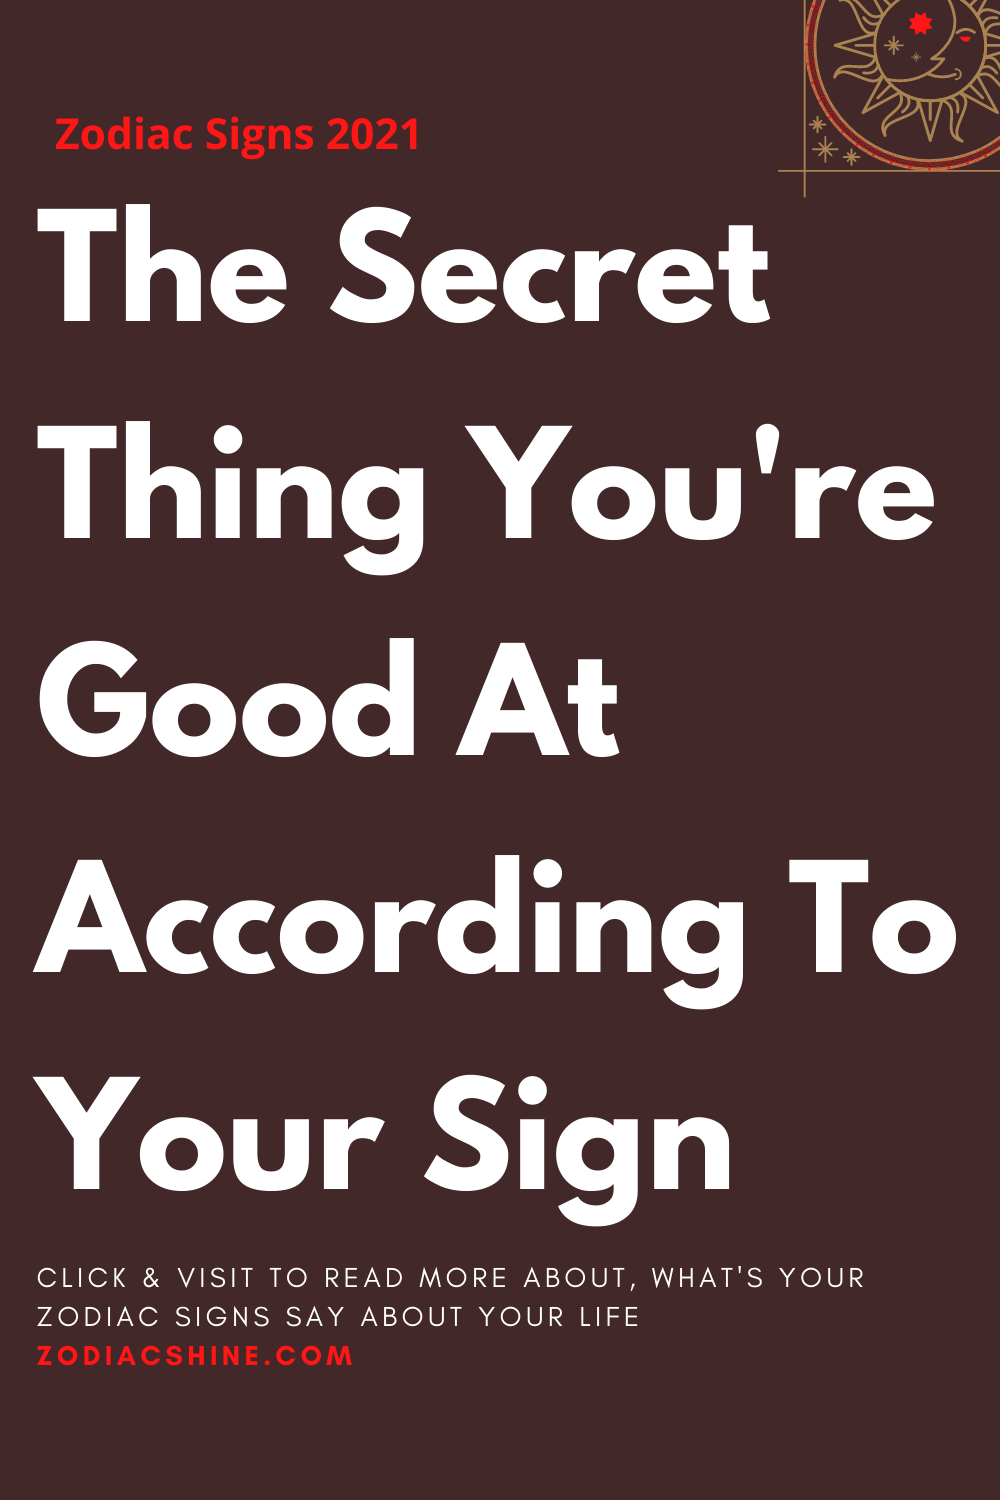 The Secret Thing You're Good At According To Your Sign